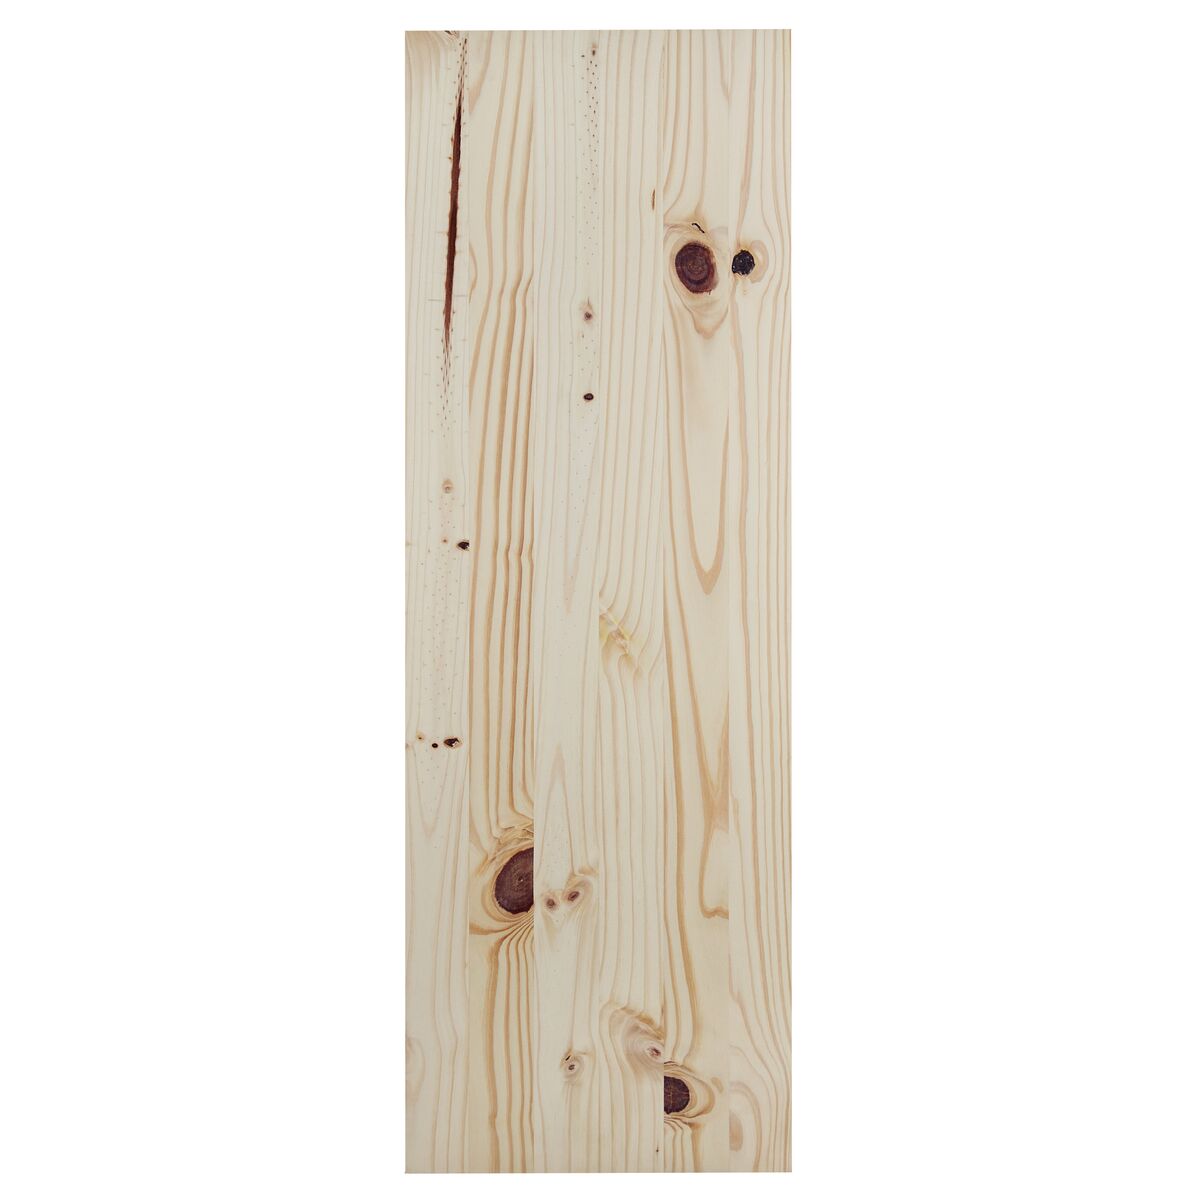 Tramontina Modulare CC 1500x600x18 mm Pine Wood Panel with a Natural Finish